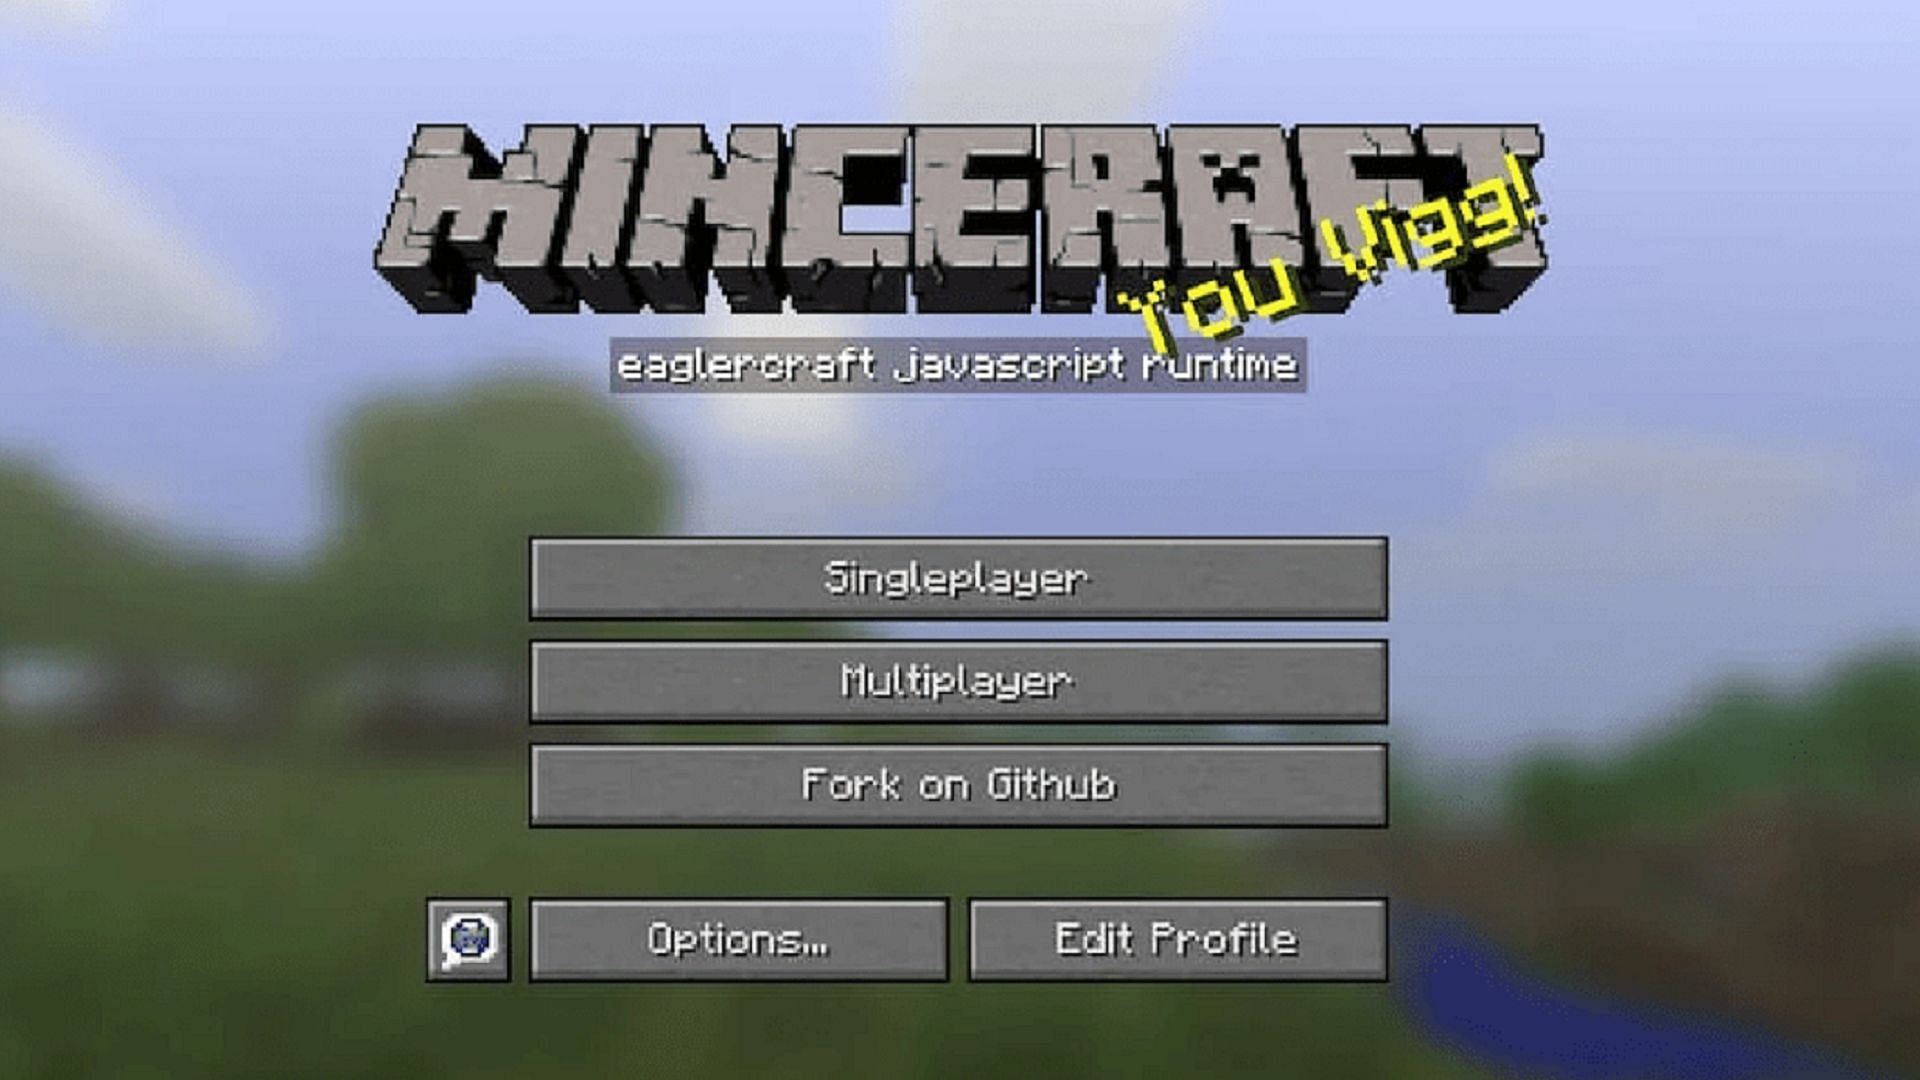 How to play Minecraft: Java Edition for free